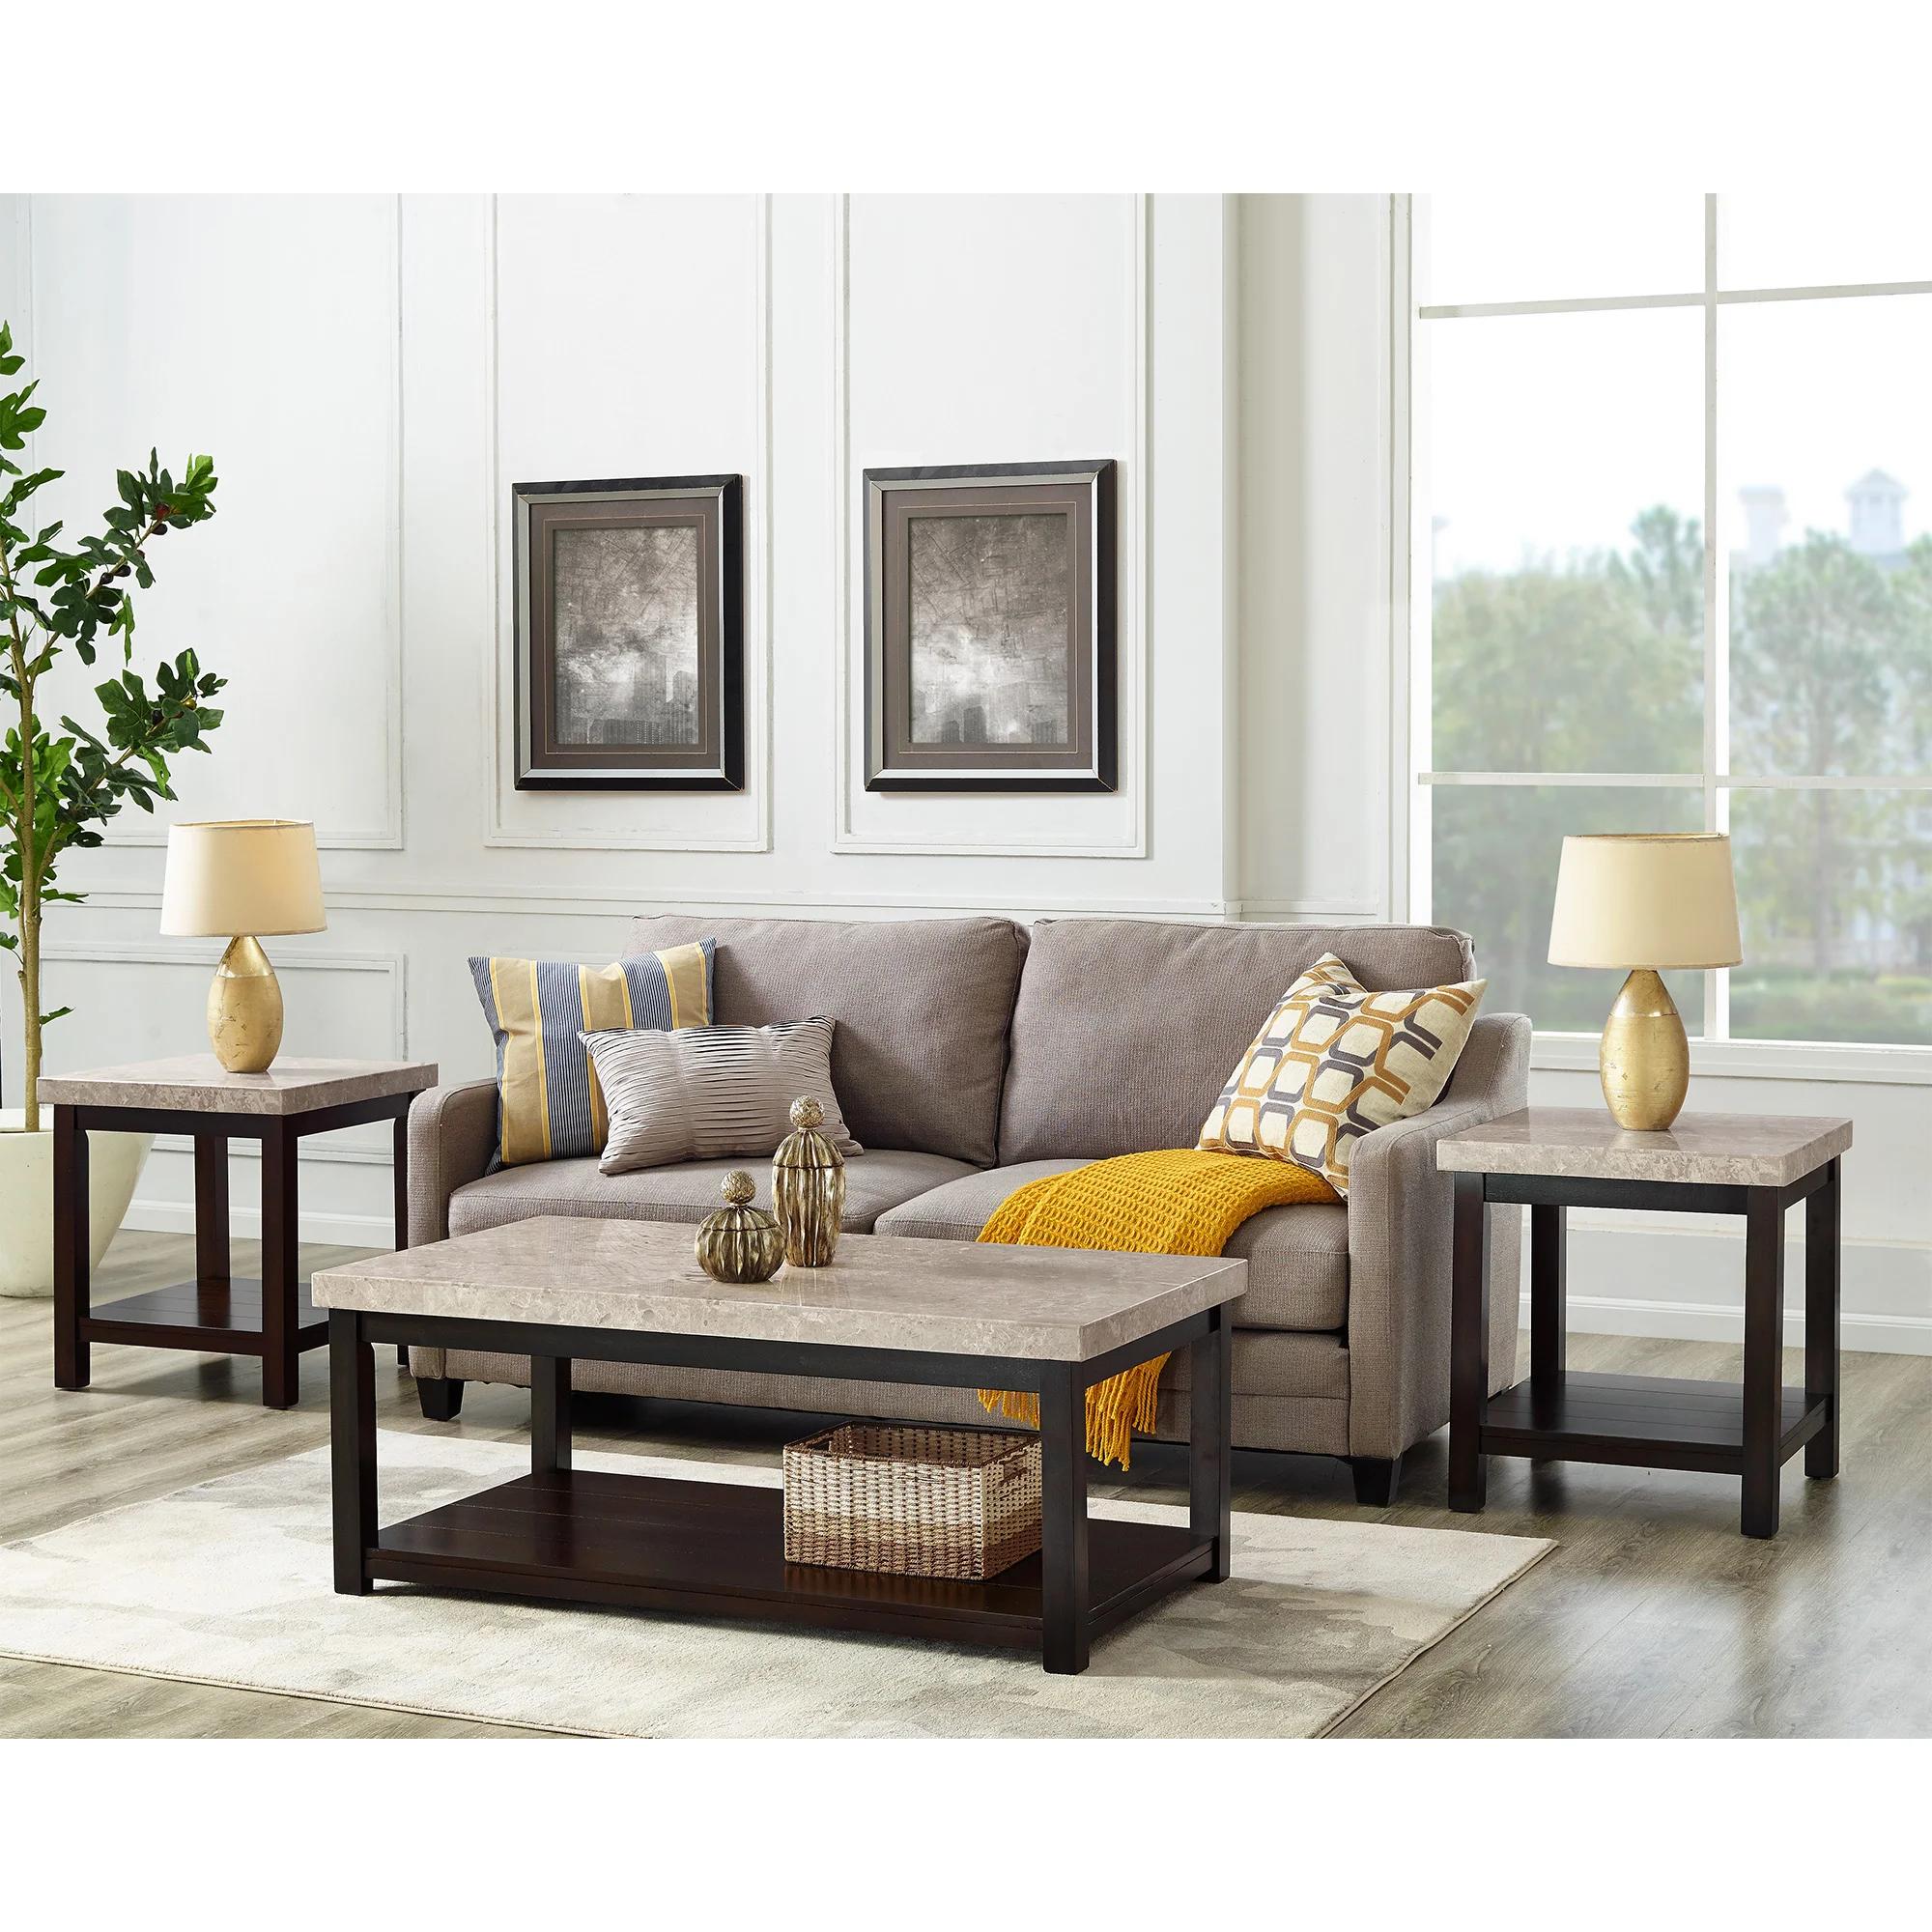 Contemporary, Transitional Coffee Table and 2 End Tables Kelia 4274-01-3pcs in Espresso, Beige 